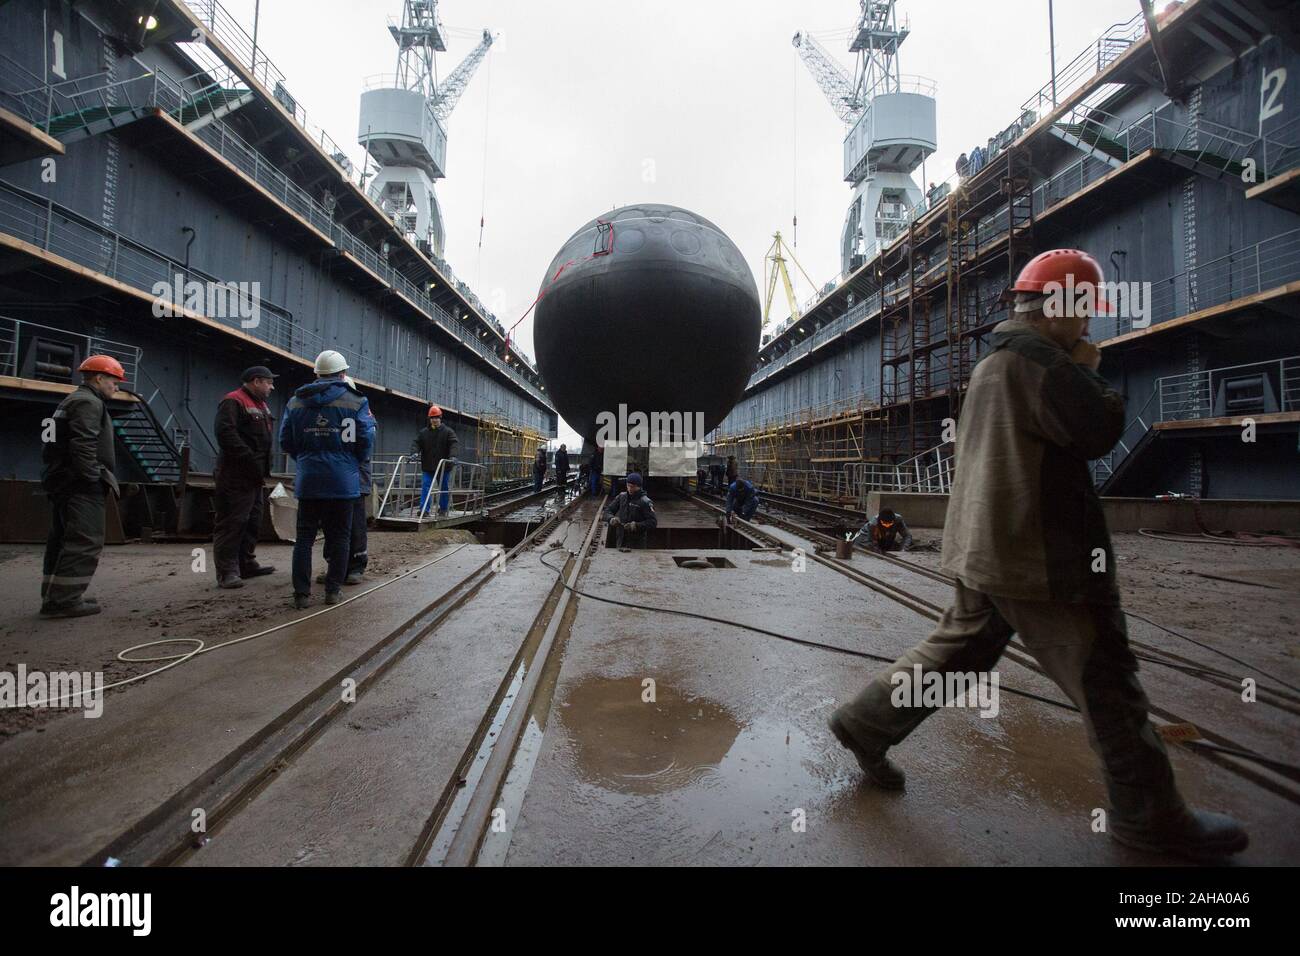 St. Petersburg, Russia. 26th Dec, 2019. Submarine Volkhov is seen before diving into the water in St. Petersburg, Russia, Dec. 26, 2019. Volkhov, built for Russian Pacific Fleet by Admiralty Shipyard, dived into the water in St. Petersburg on Thursday. Credit: Irina Motina/Xinhua/Alamy Live News Stock Photo